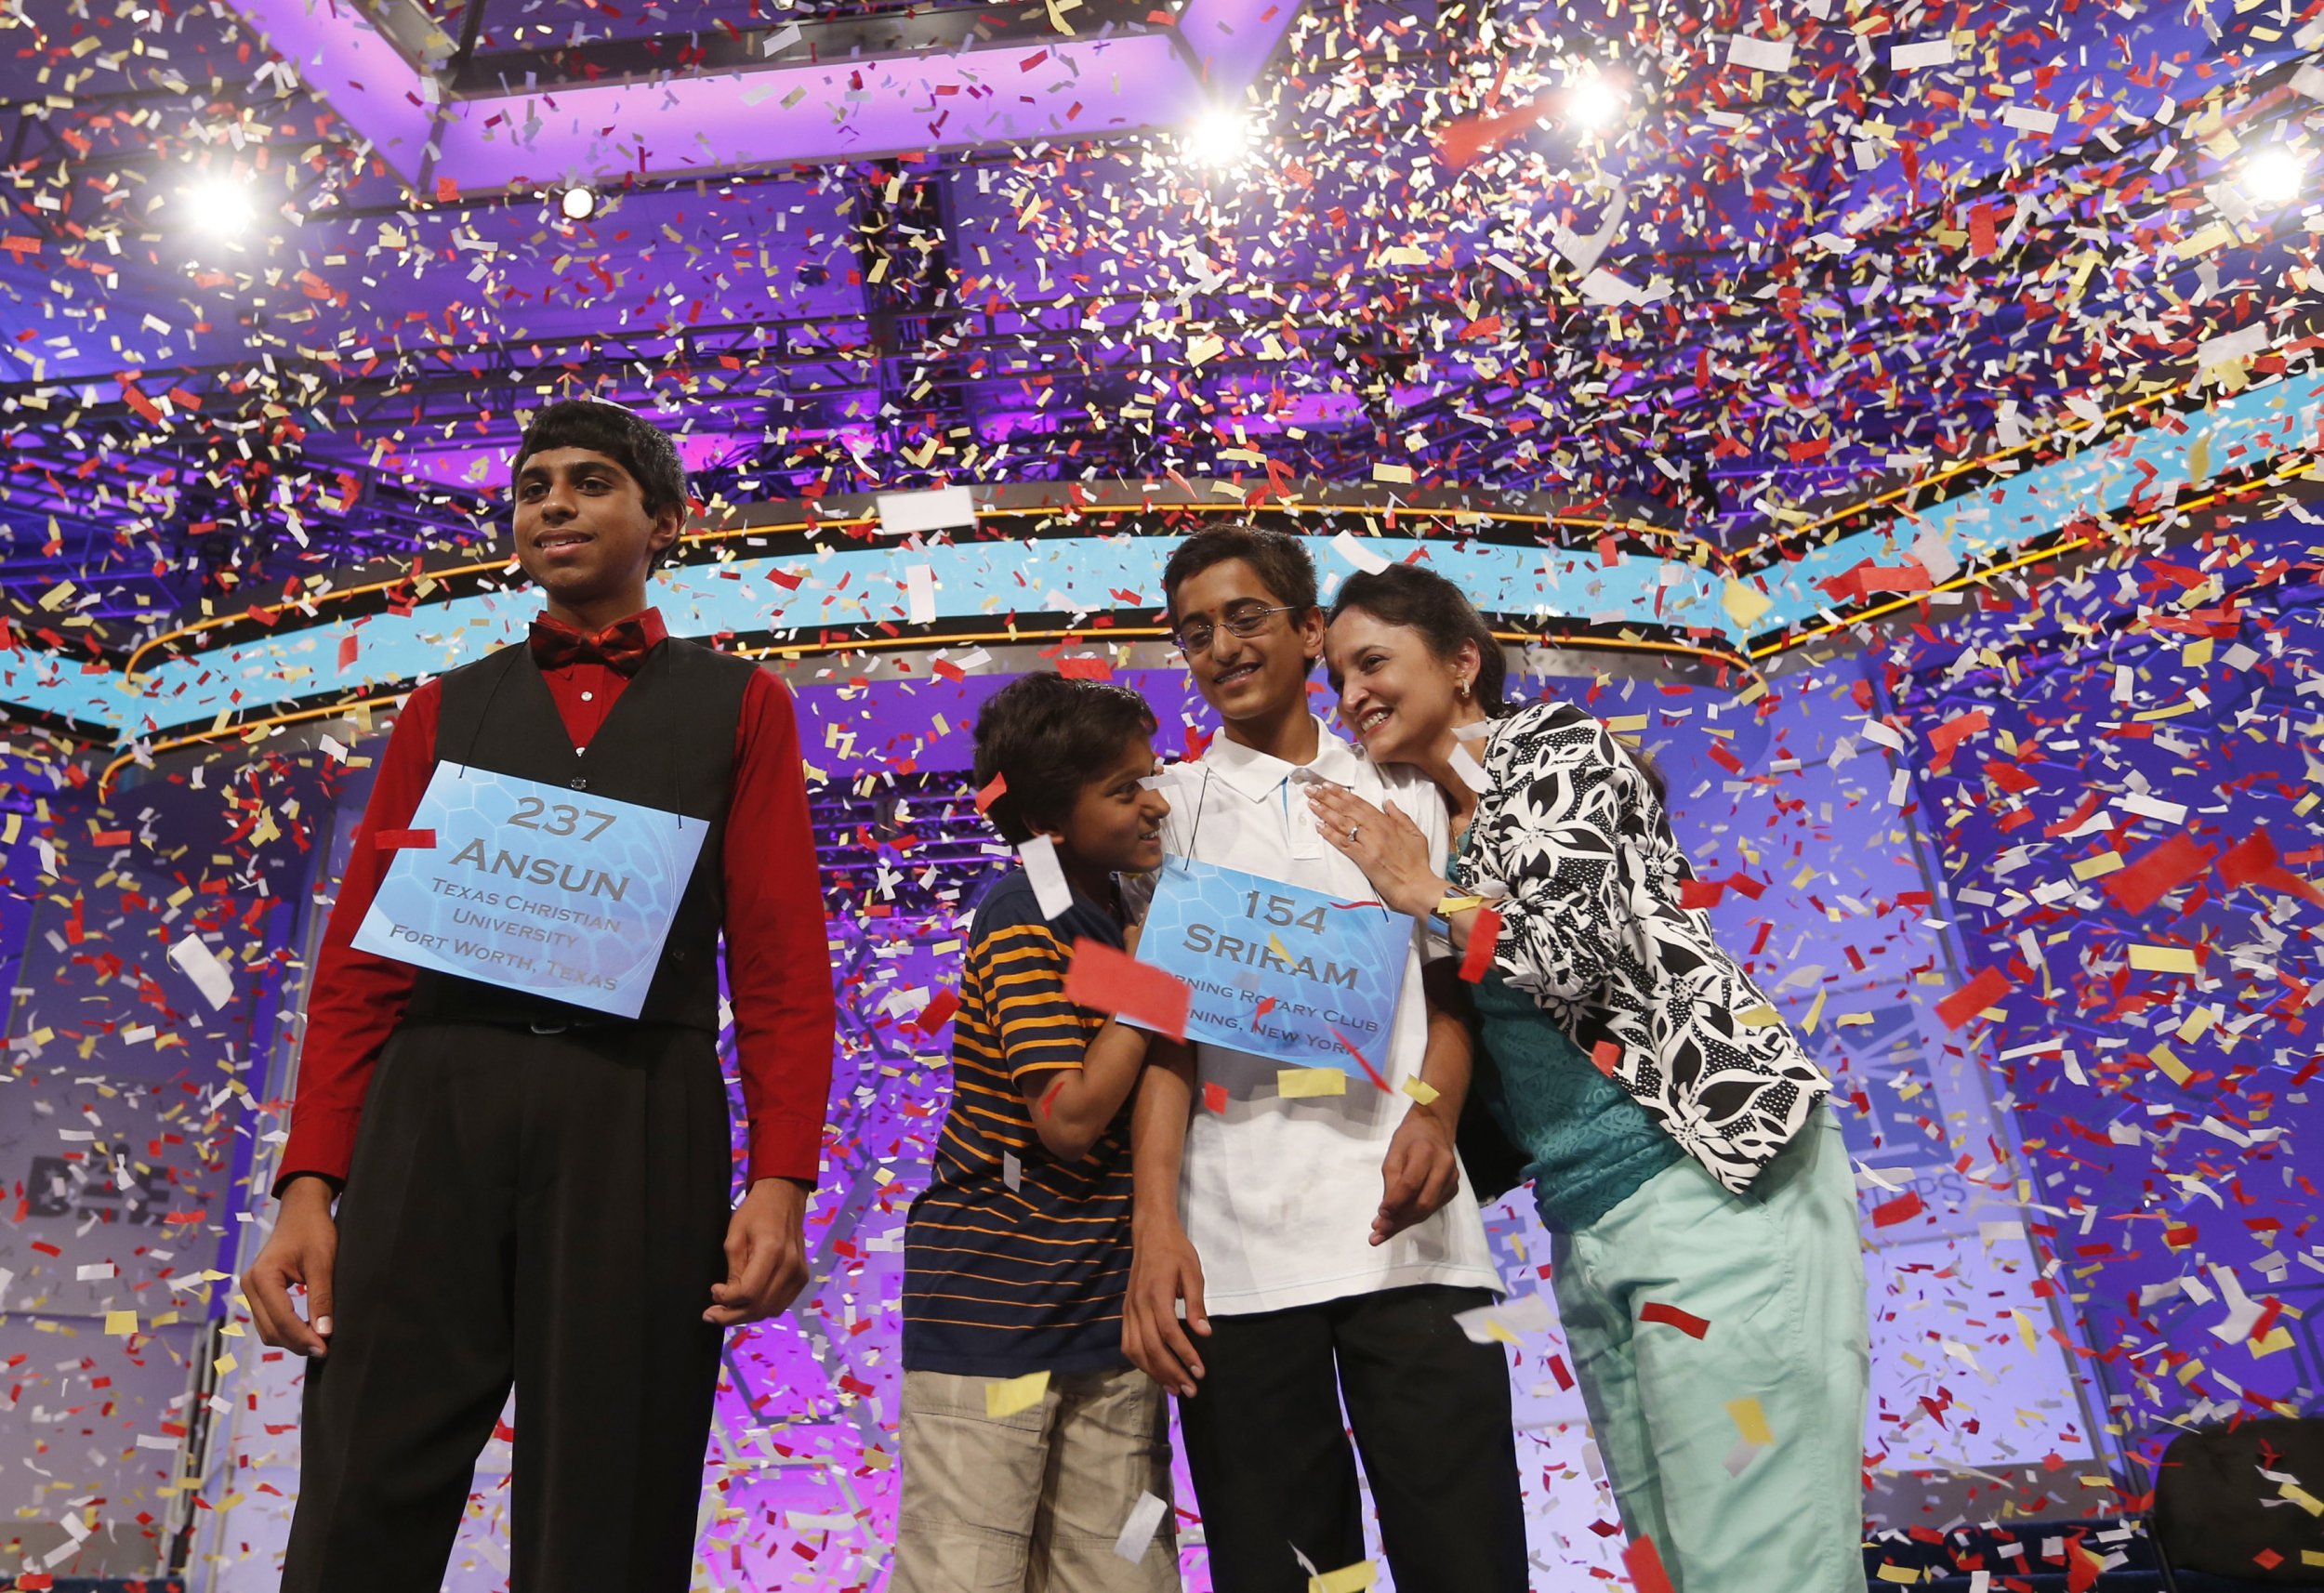 Scripps Spelling Bee Live Stream 2015 Where To Watch The Finals And